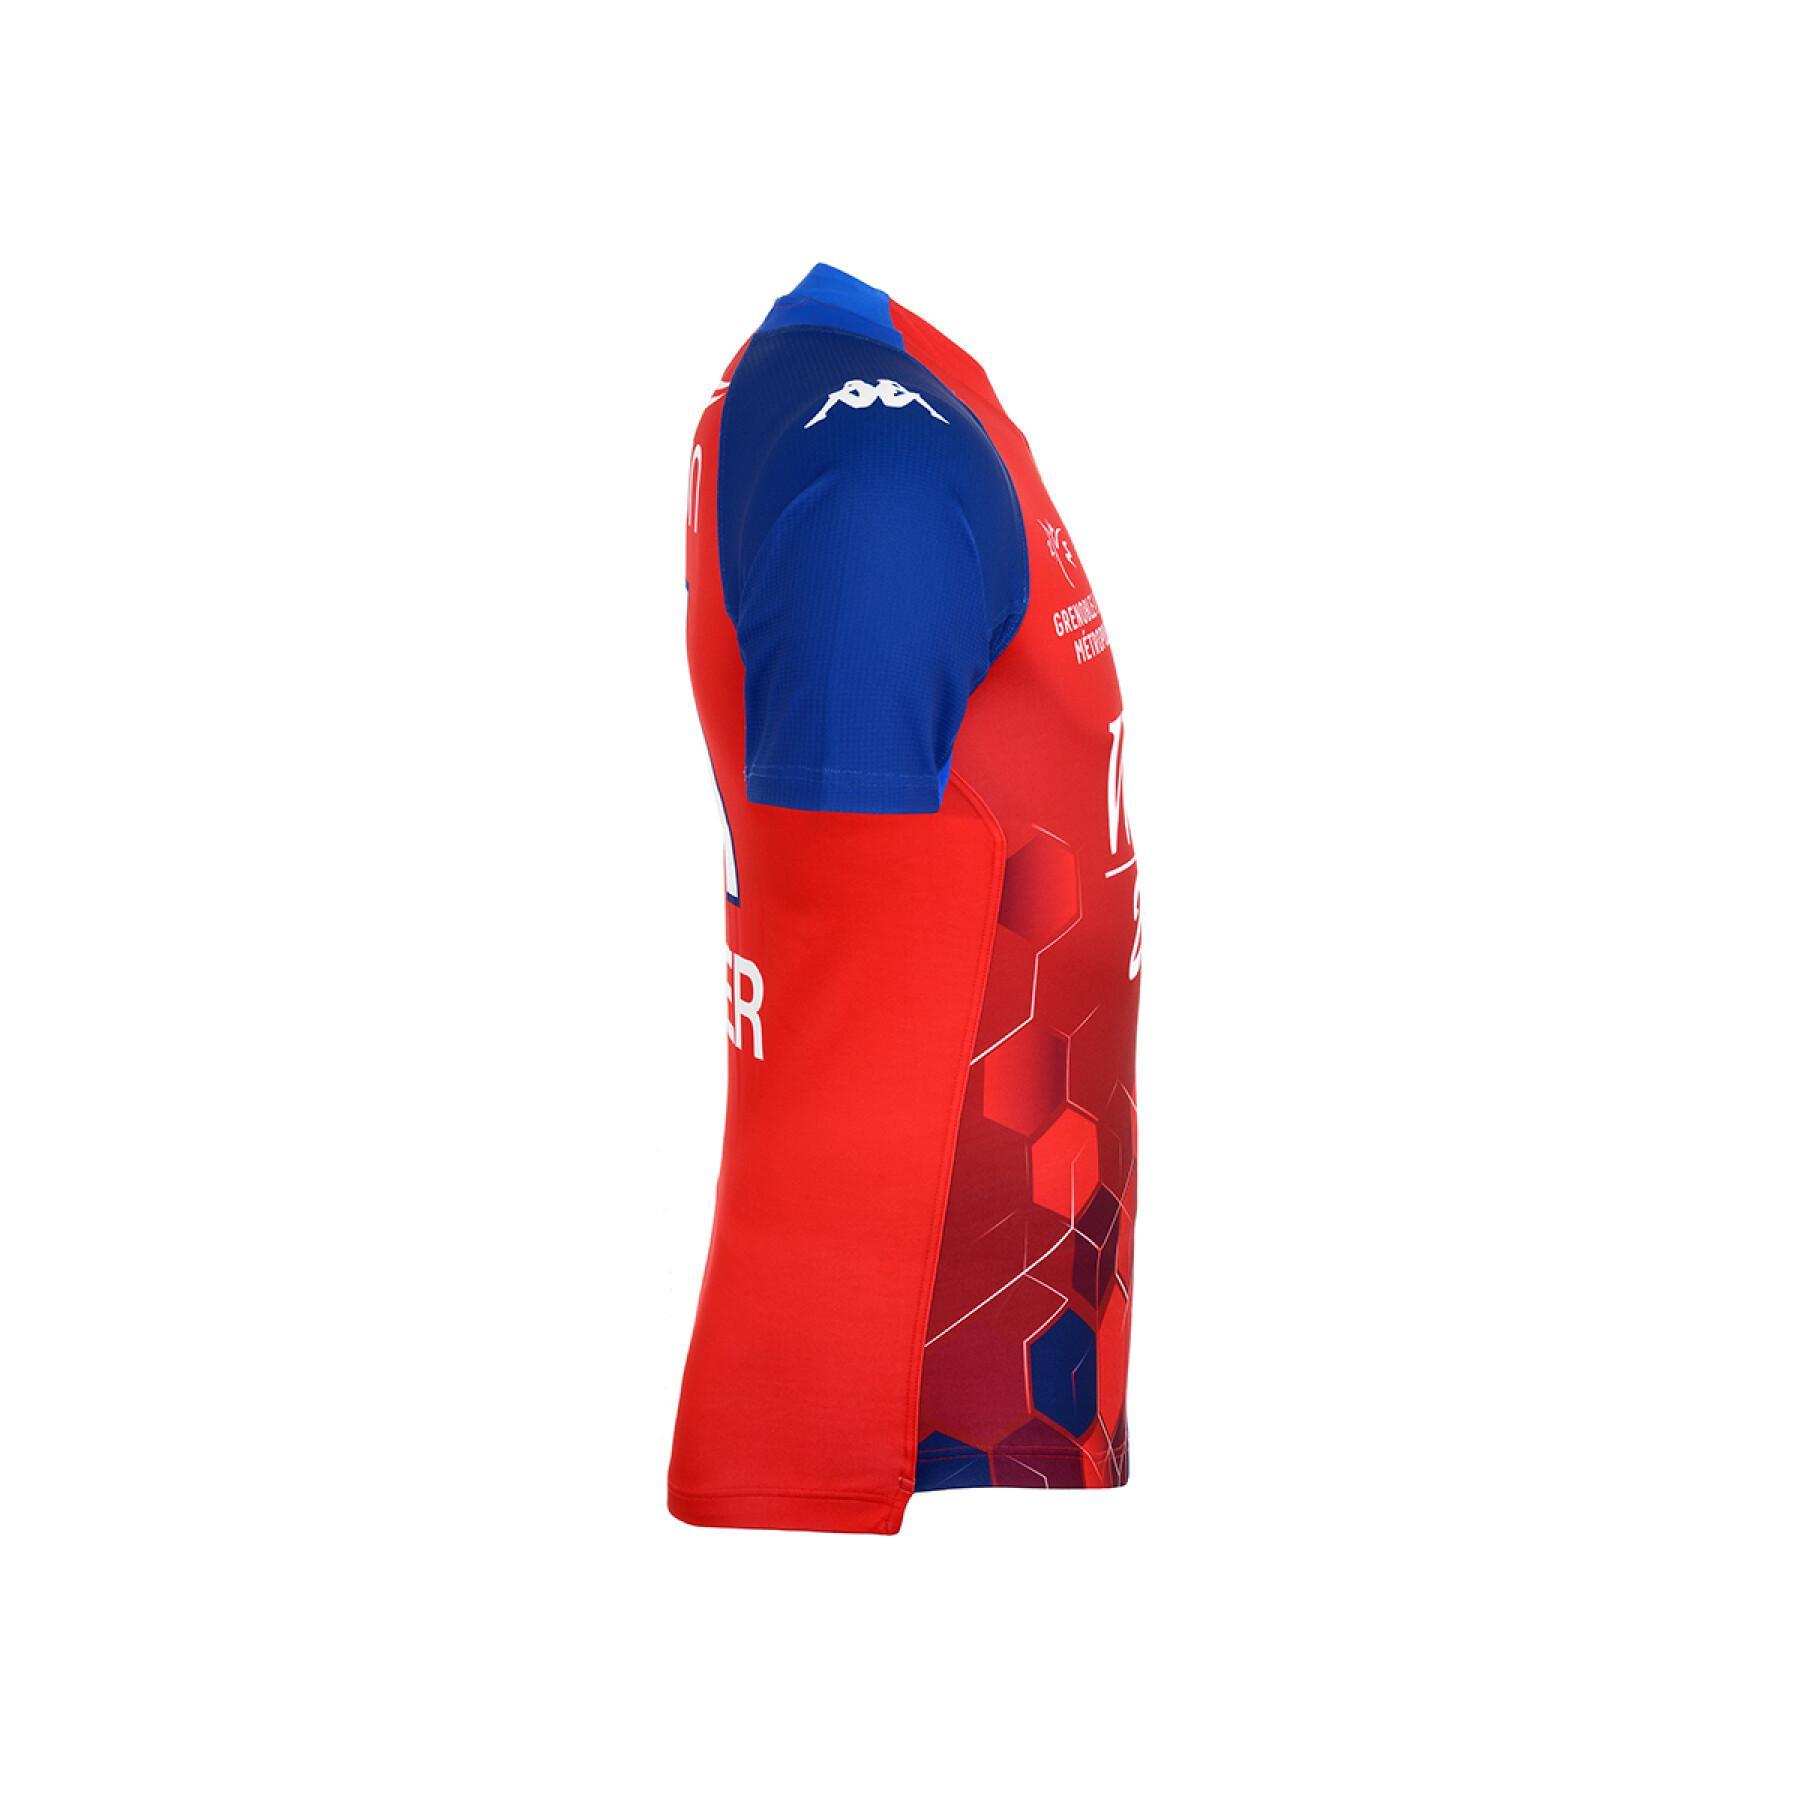 Camisola away FC Grenoble Rugby 2019/20